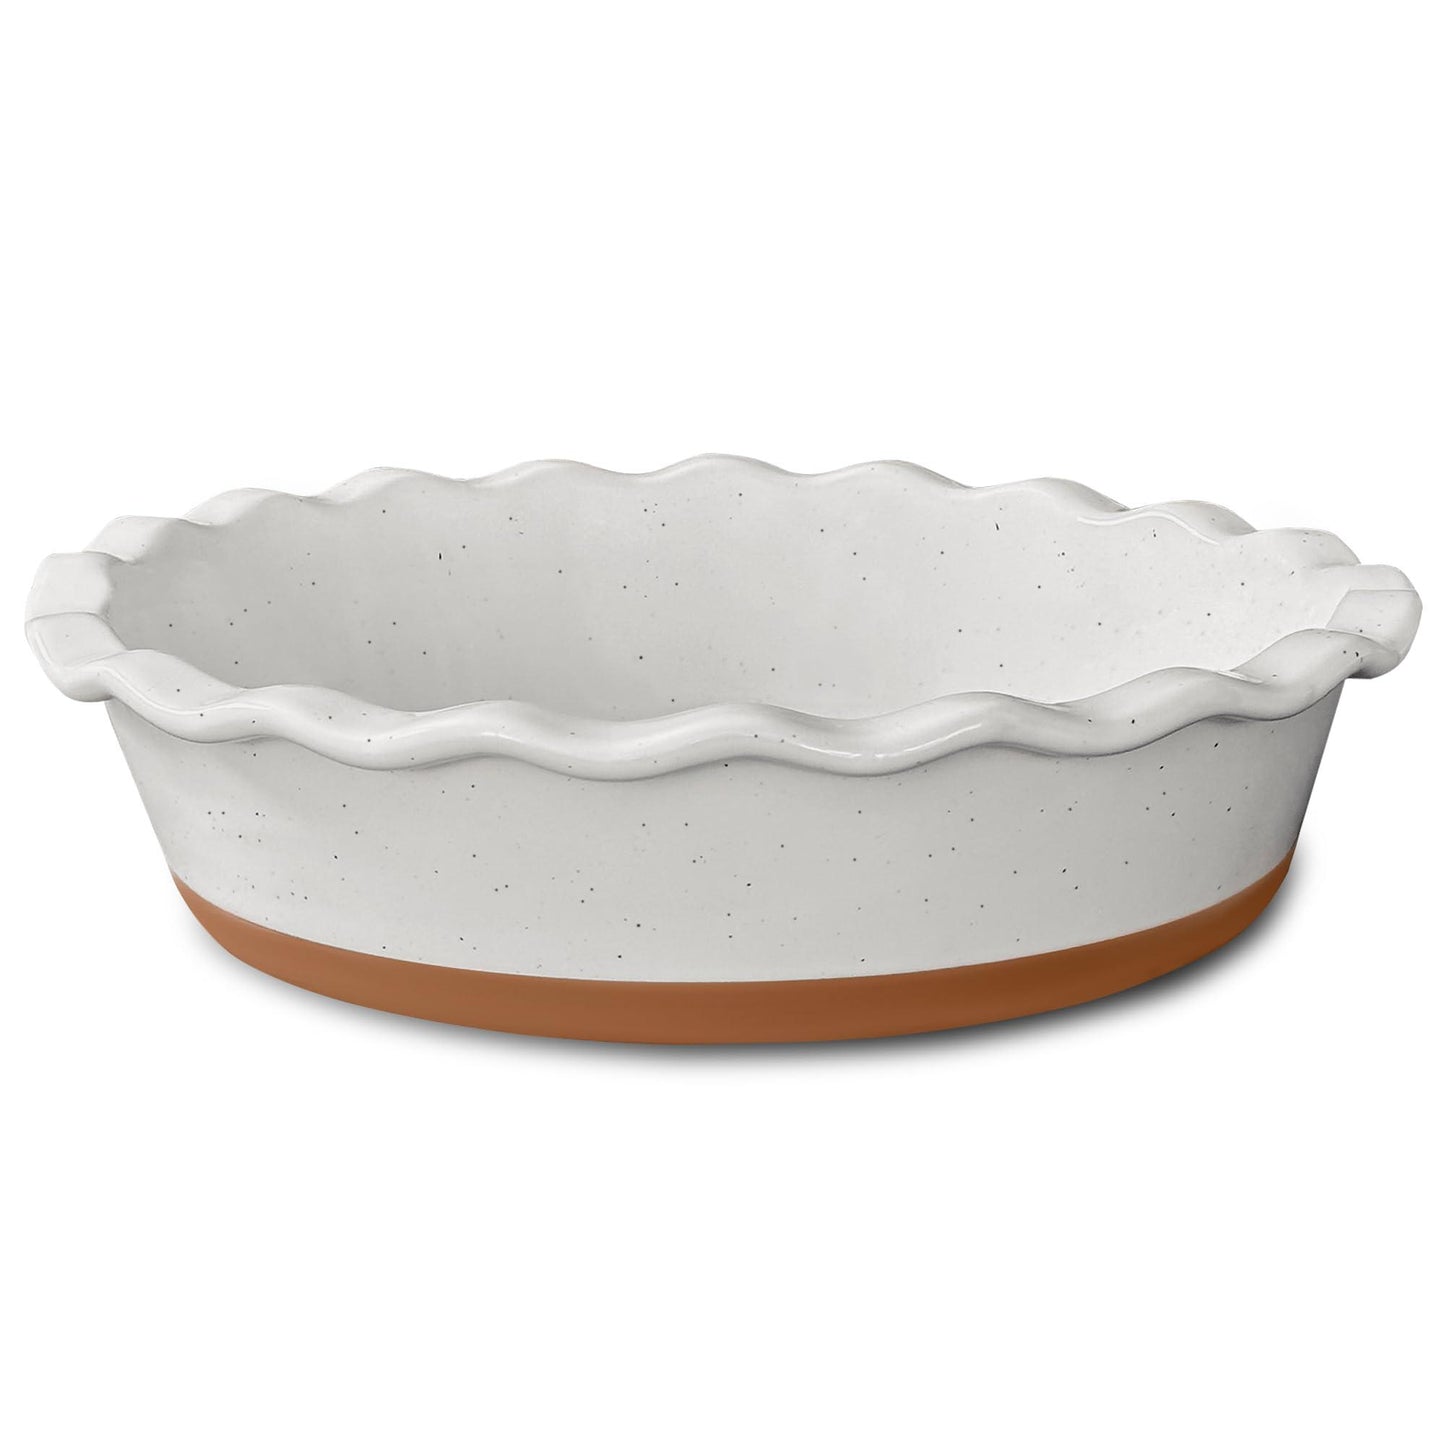 Mora Ceramic Deep Fluted Pie Dish for Baking - 9 inch Porcelain Pie Plate for Apple, Quiche, Pot Pies, Tart, etc. - Modern Farmhouse Style - Vanilla White - CookCave